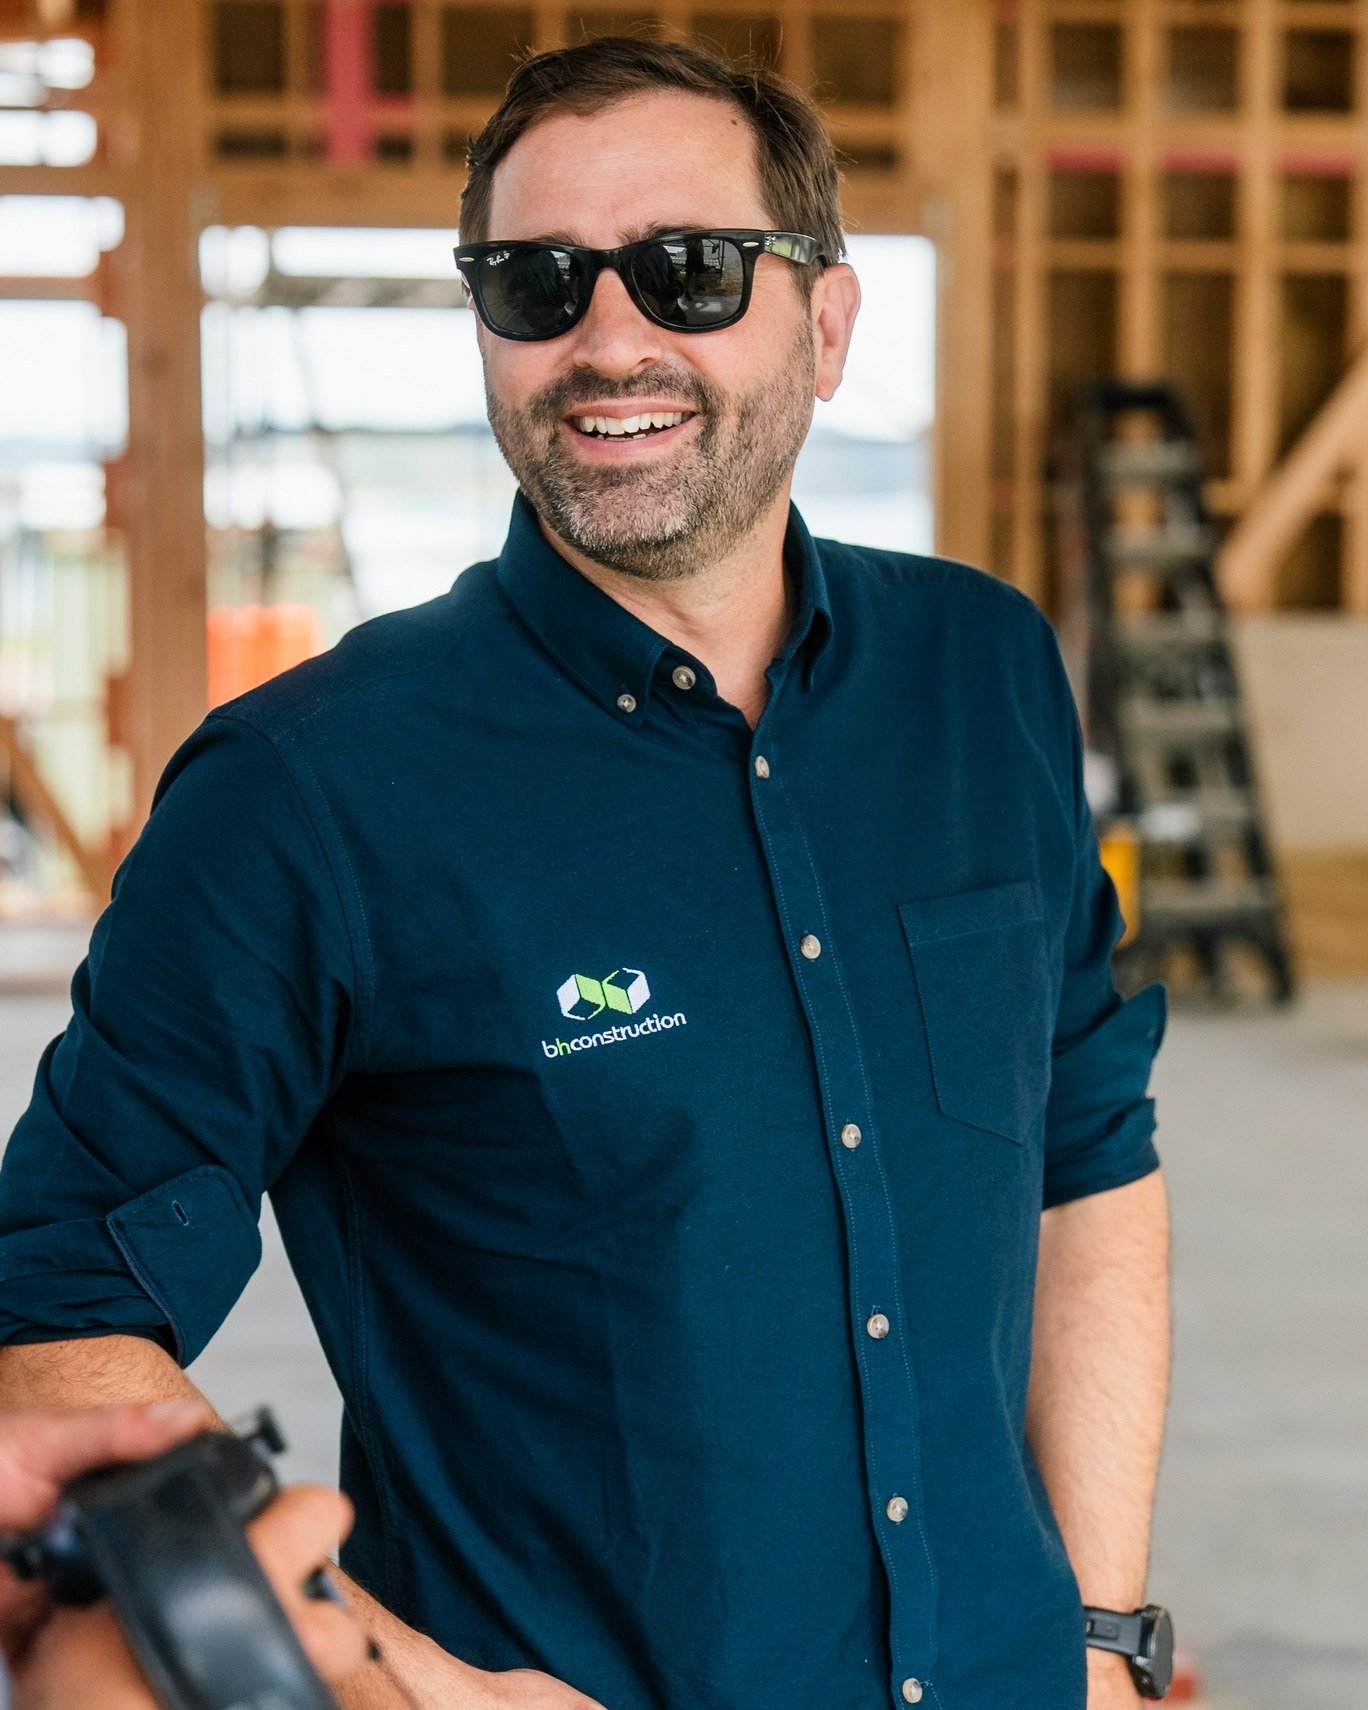 Meet the visionary behind BH Construction, Ben Holwerda! As the owner and founder, Ben has steered BH Construction to excellence for 16 years. His passion for perfection and attention to detail fuels all projects, keeping everyone inspired. Ready to 